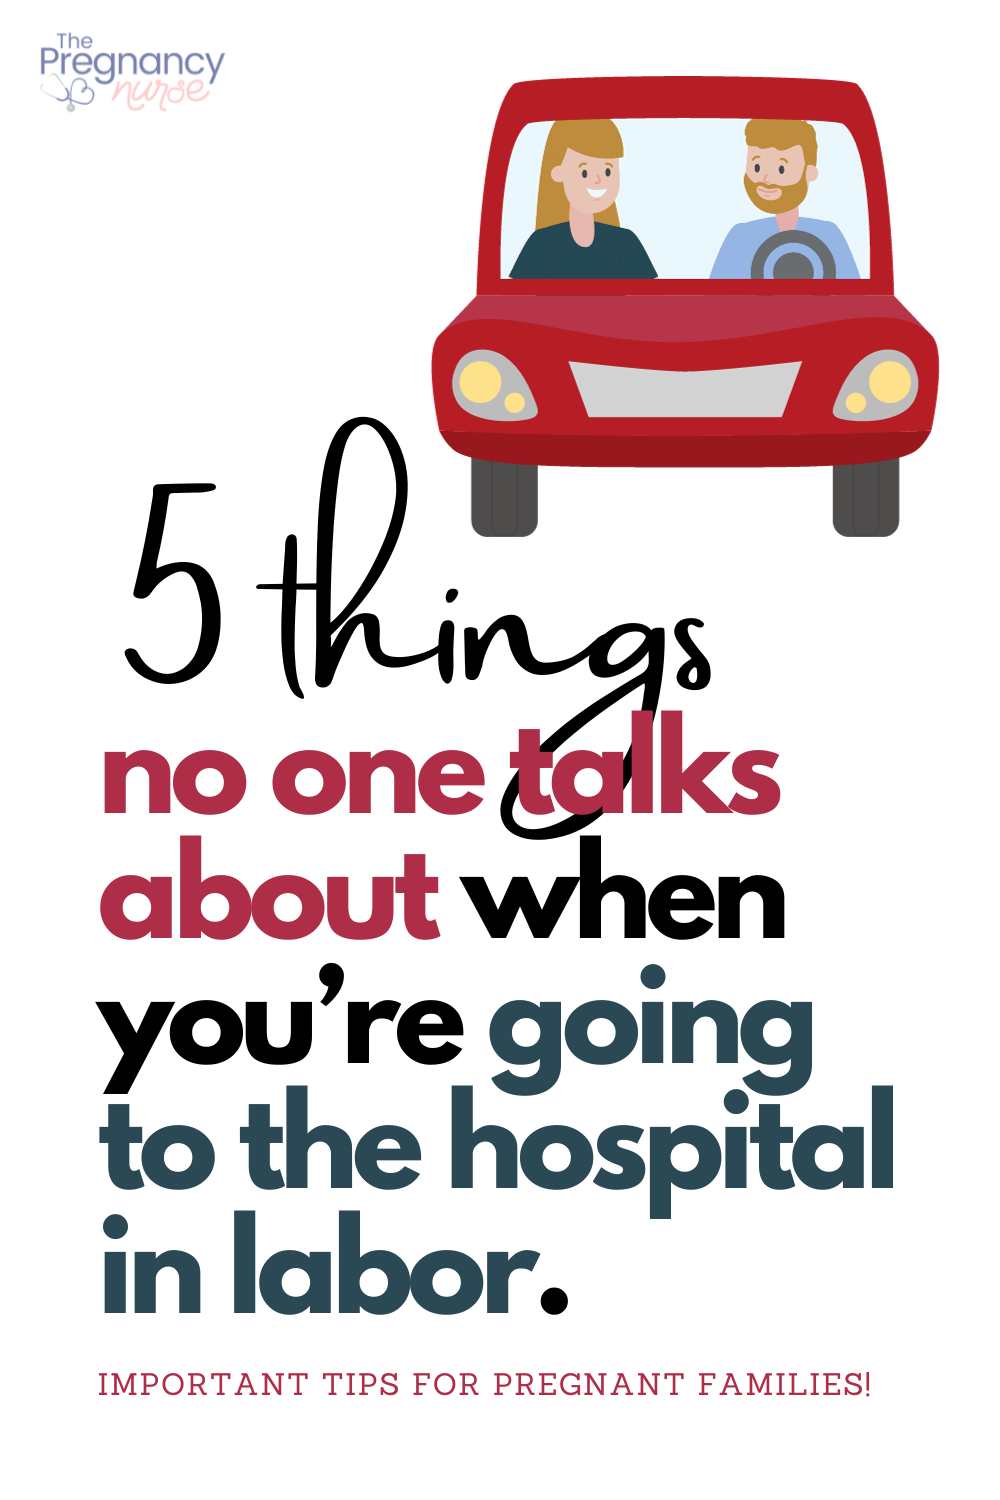 couple in a red car / 5 things no one talks about when you're going to the hospital in labor.